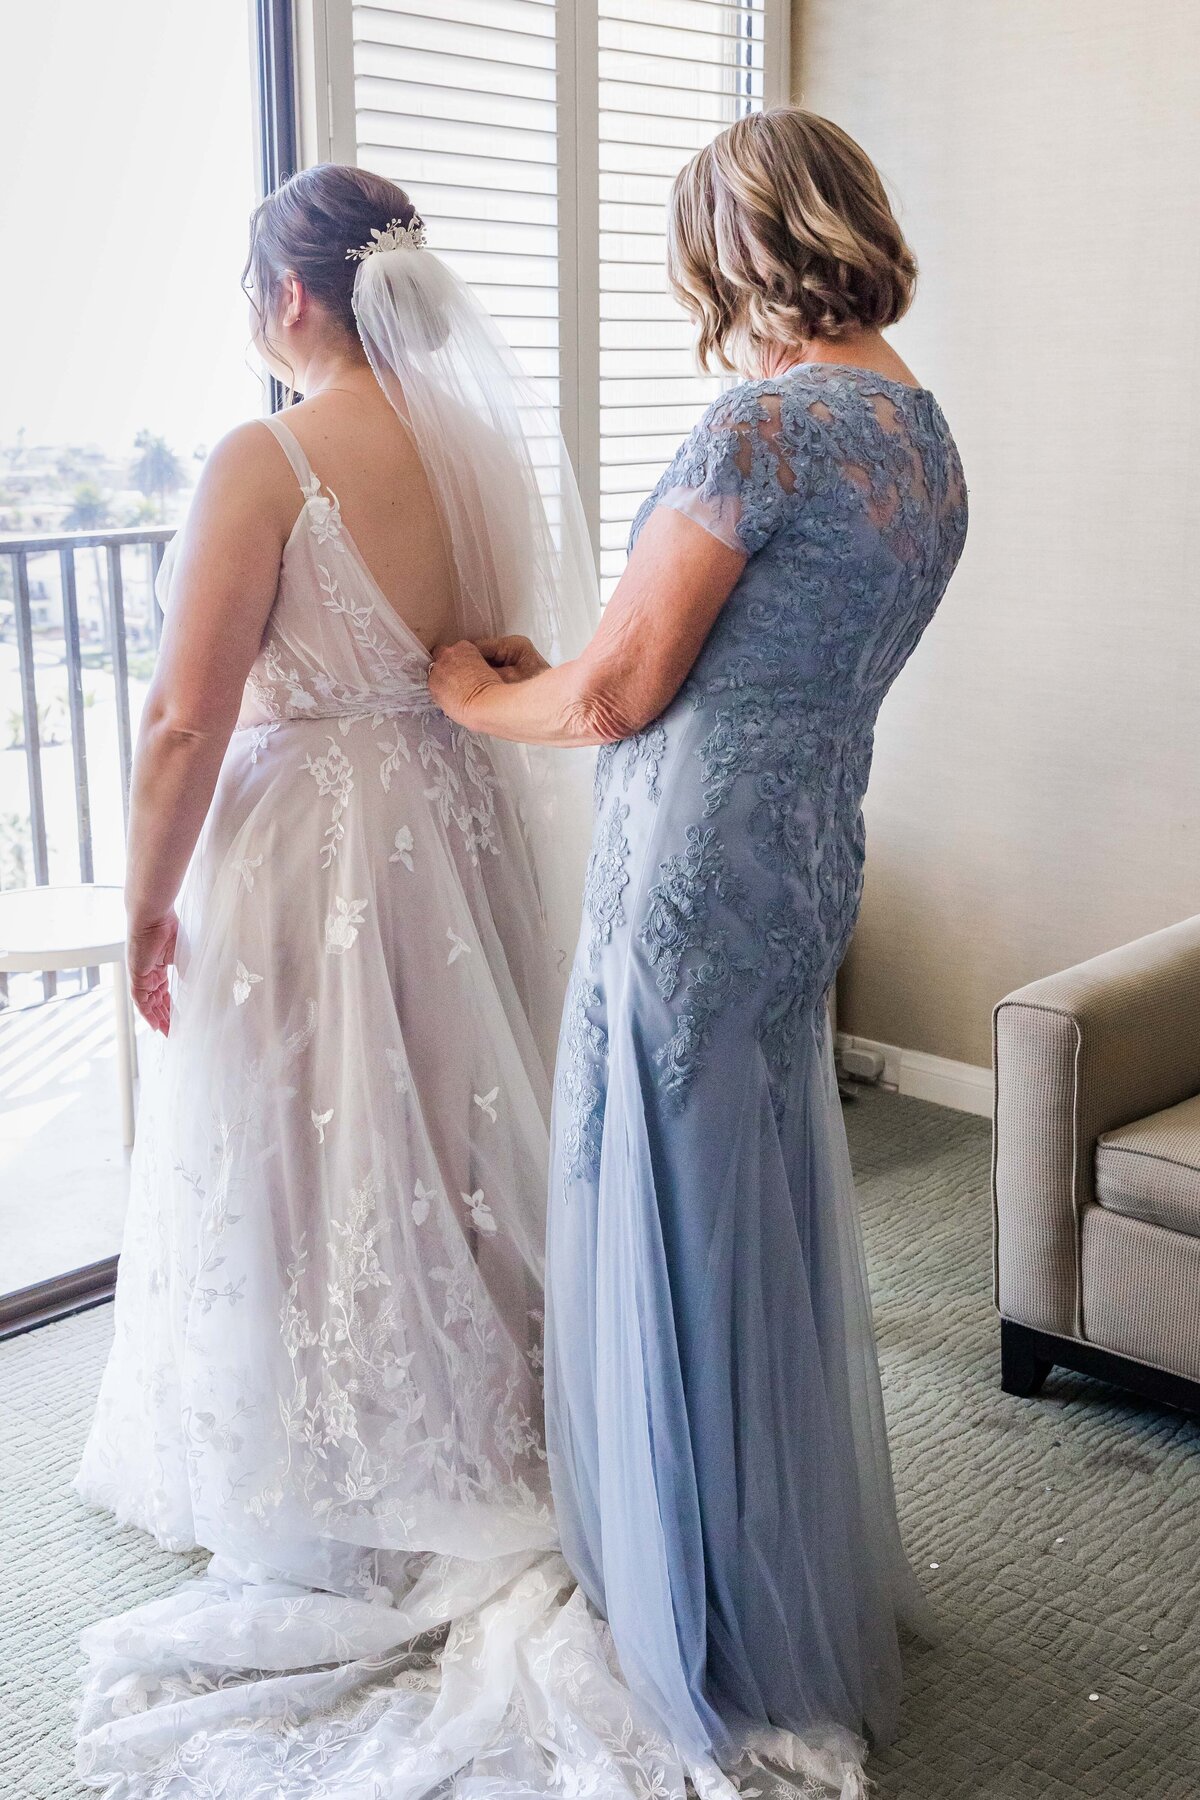 mother-buttoning-bride-into-dress